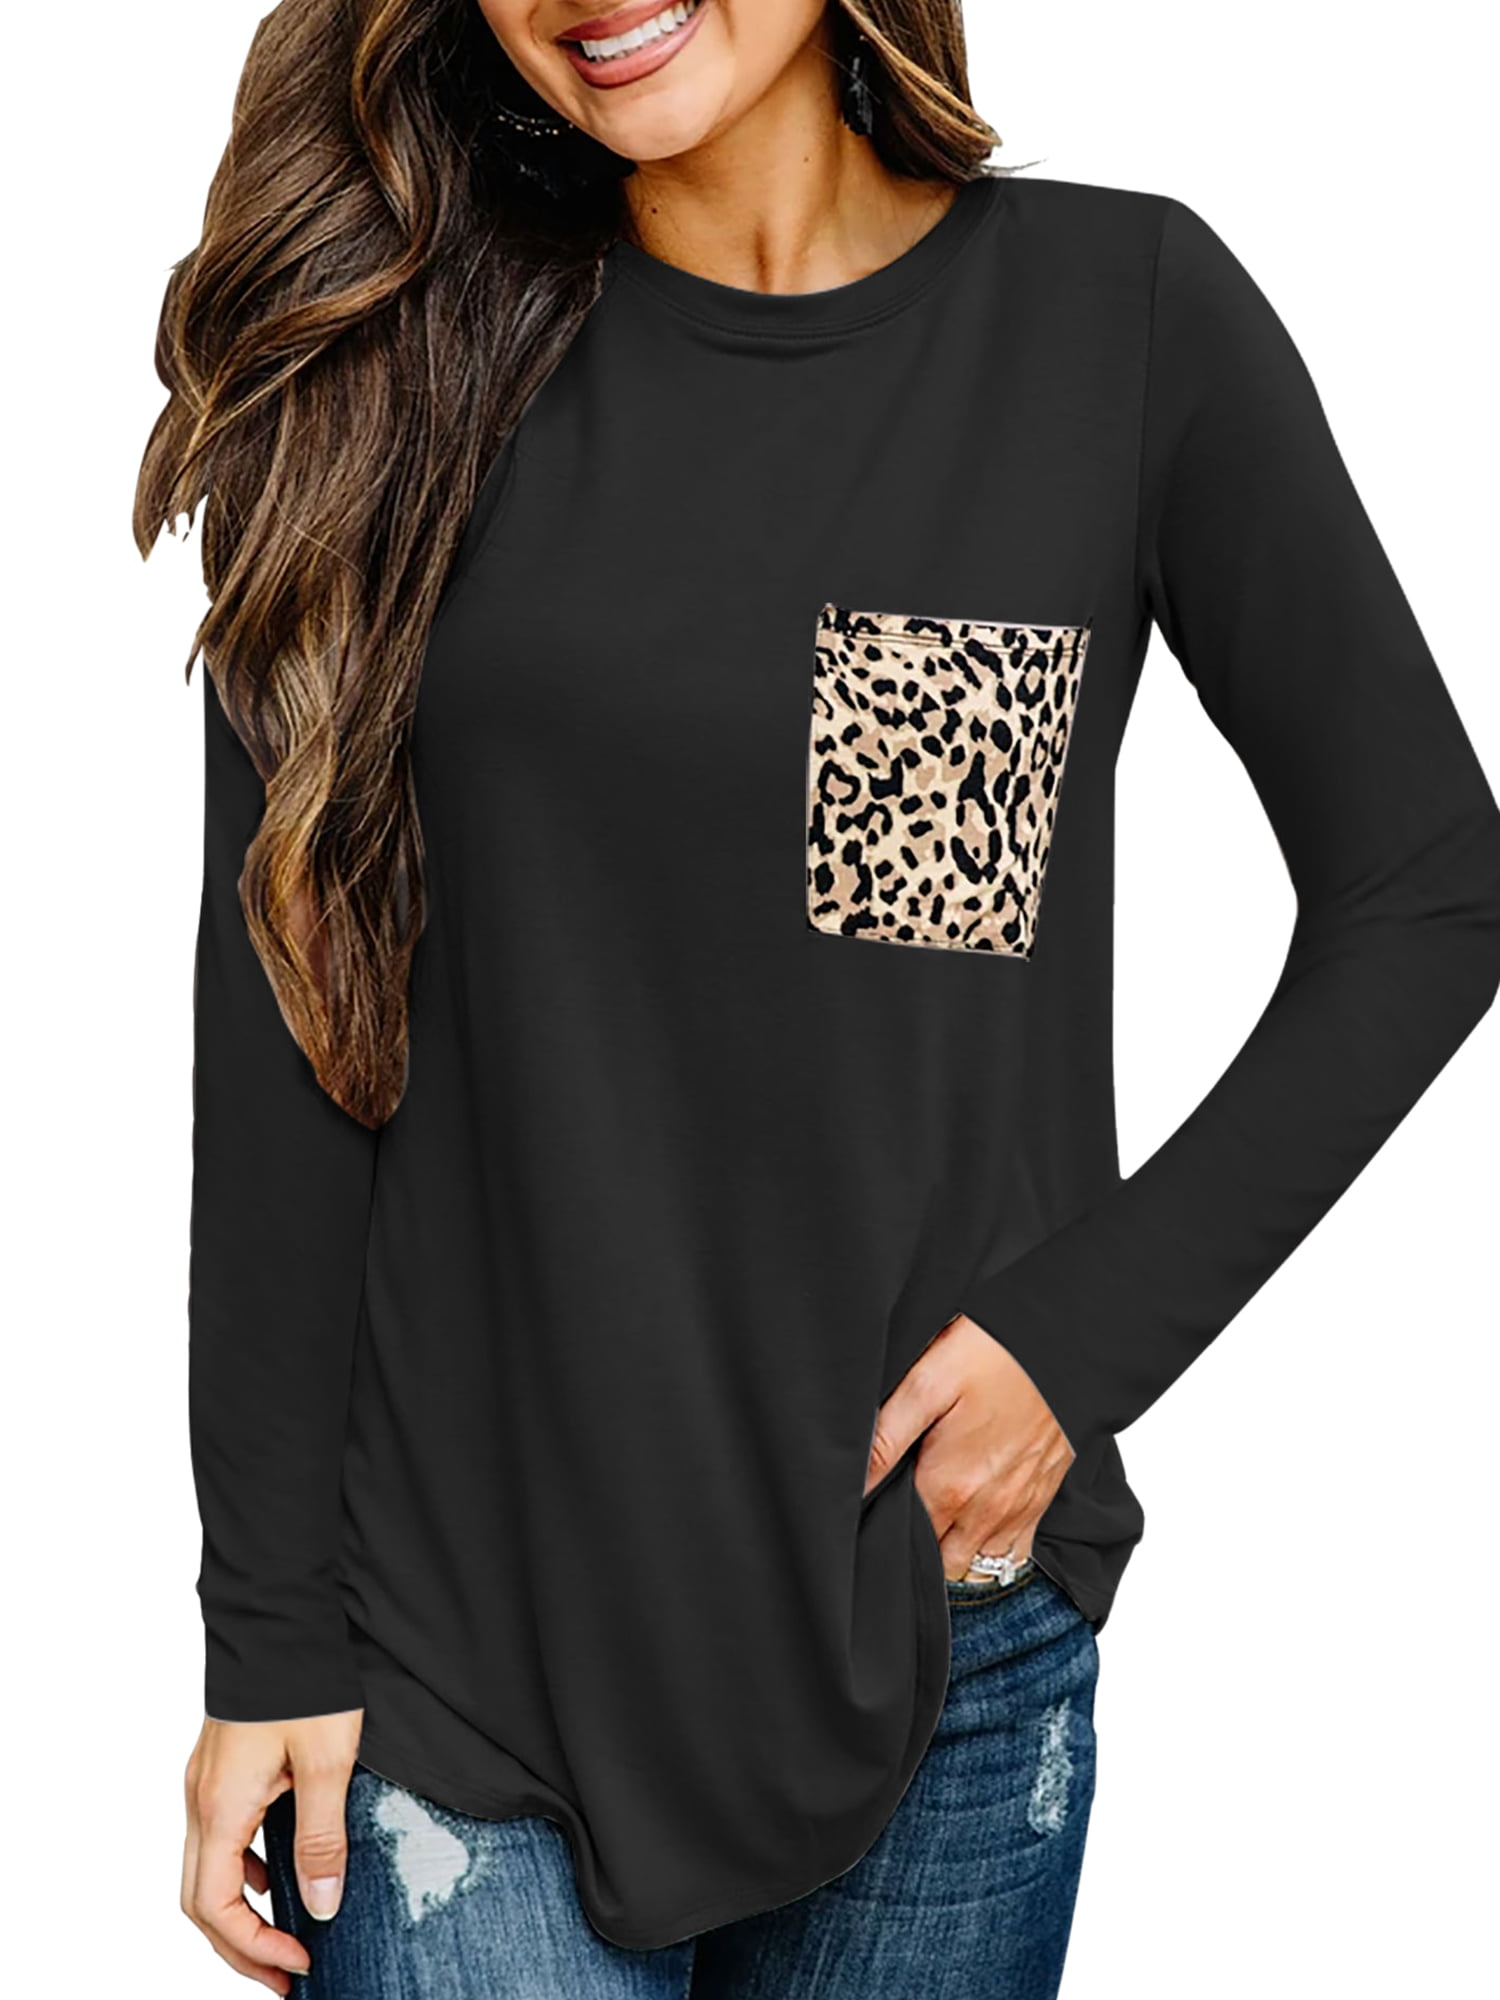 Fronage Womens Leopard Print Tops Long Sleeve Casual Loose Fit Shirts Color Block Tunics